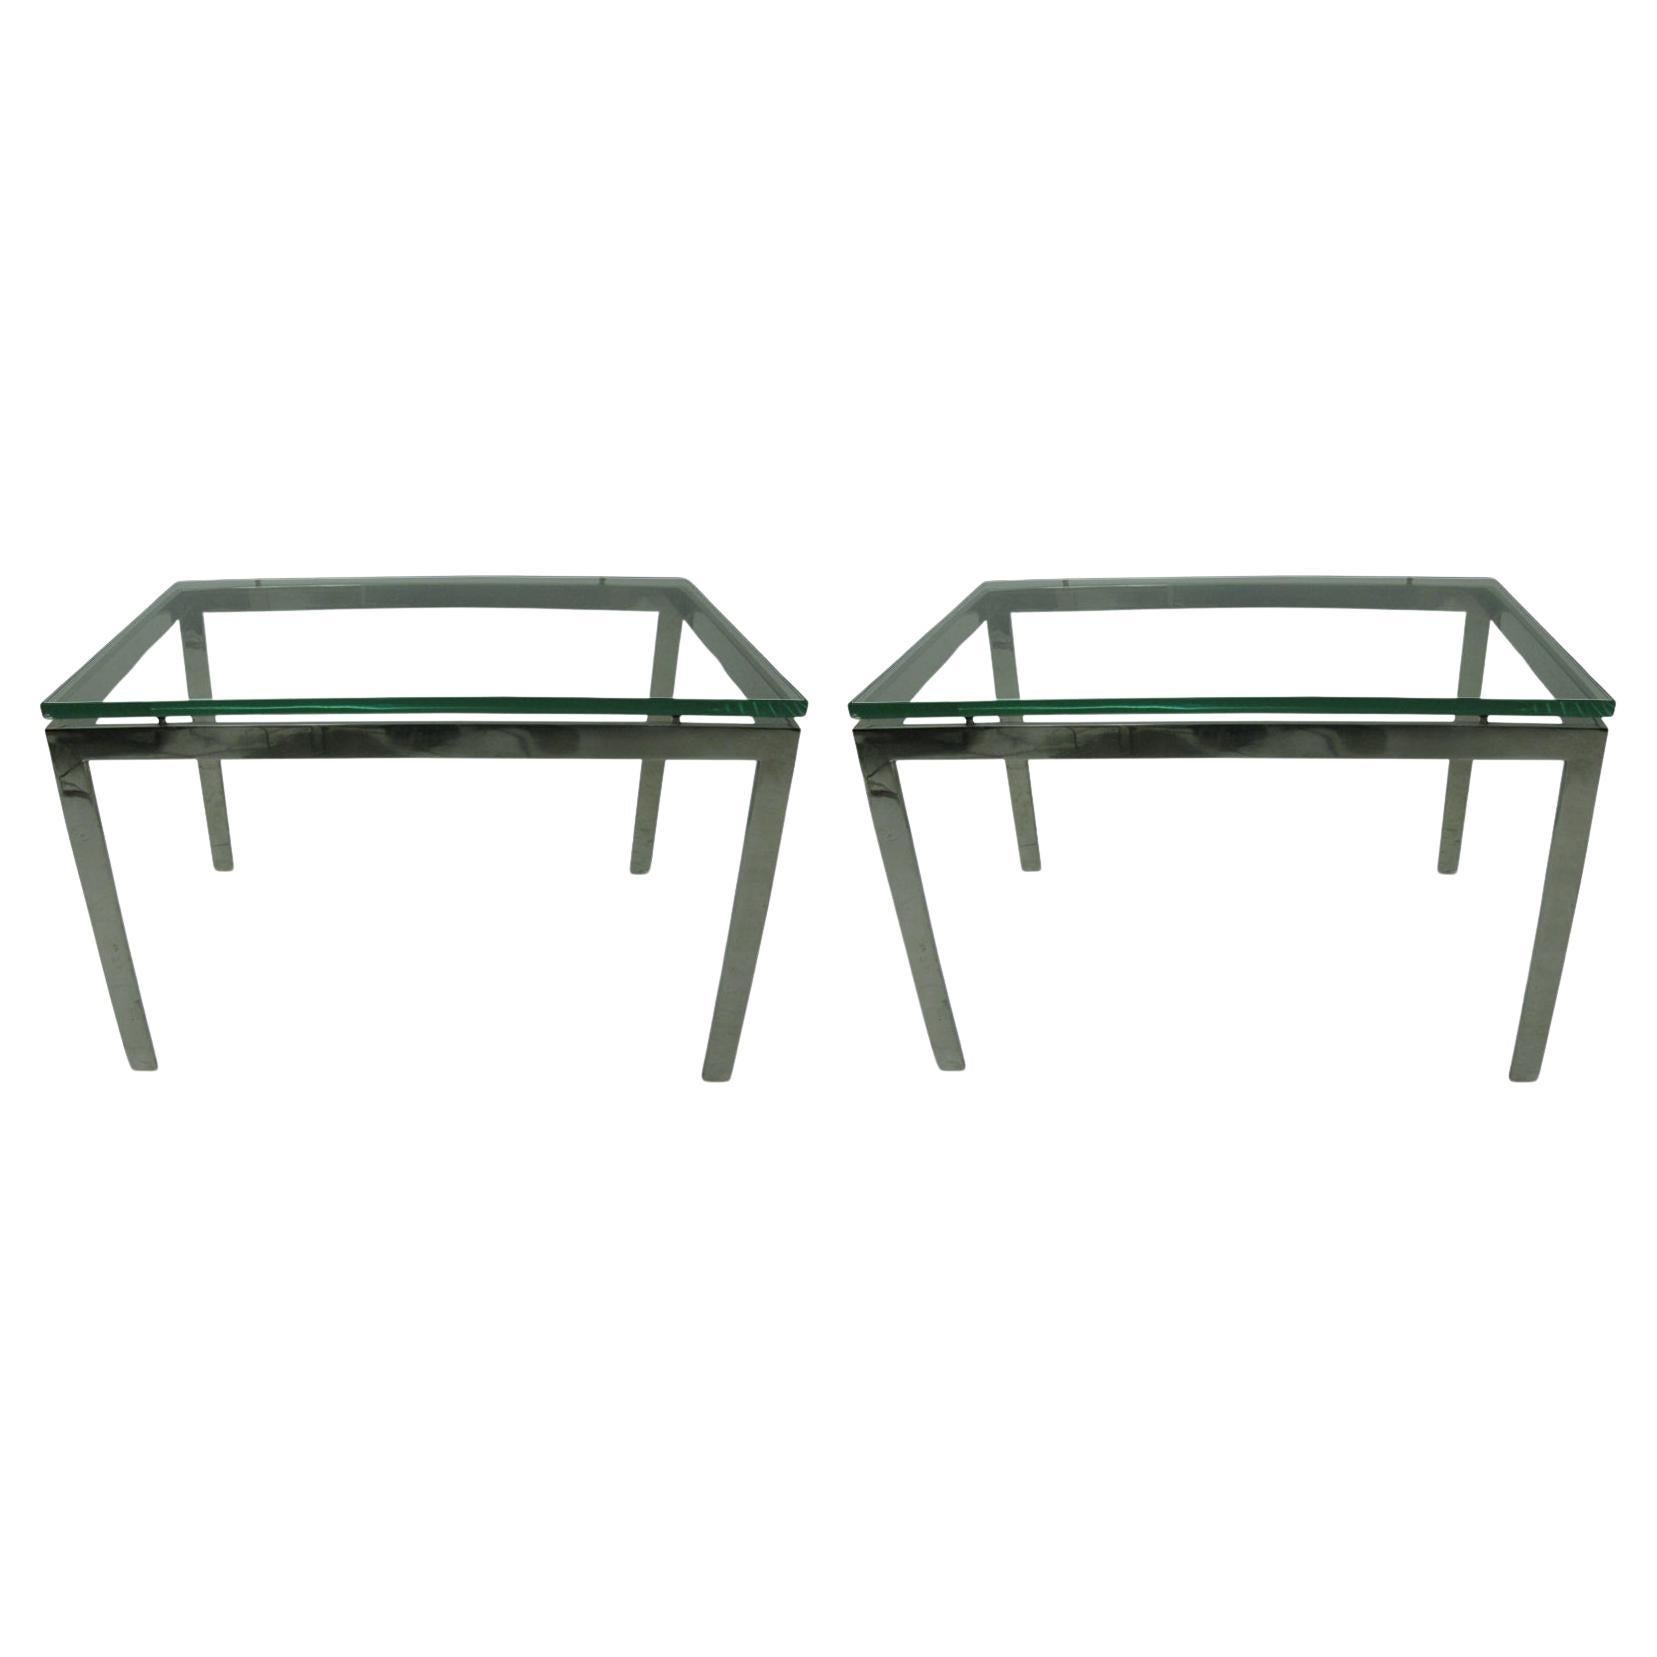 Pair of Mid-Century Modern Nickel Chrome Steel Tables with Dimensional Glass Top